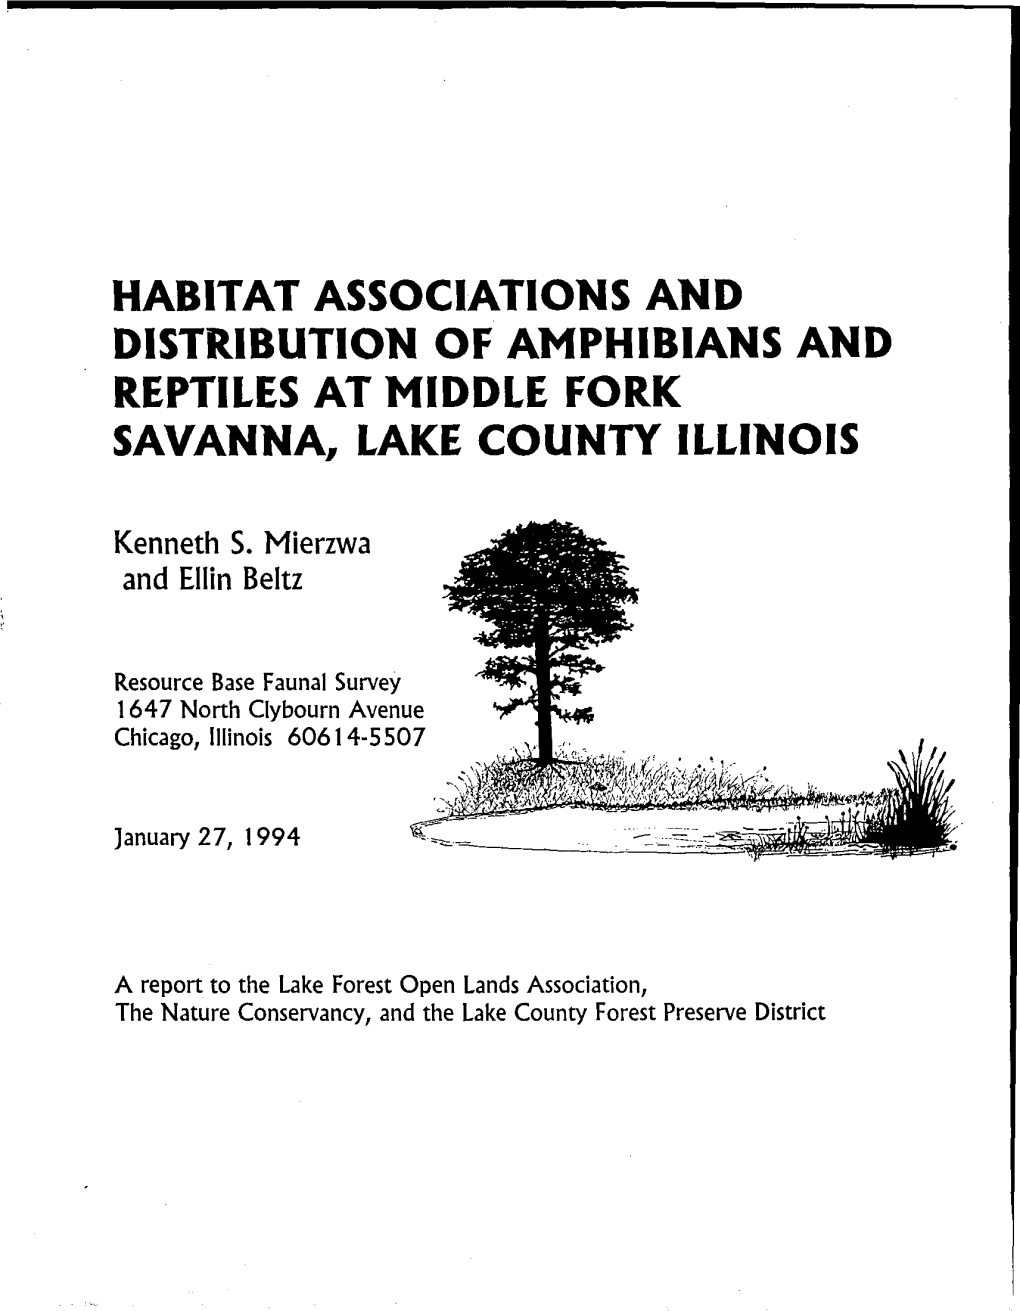 Habitat Associations and Distribution of Amphibians and Reptiles at Middle Fork Savanna, Lake County Illinois